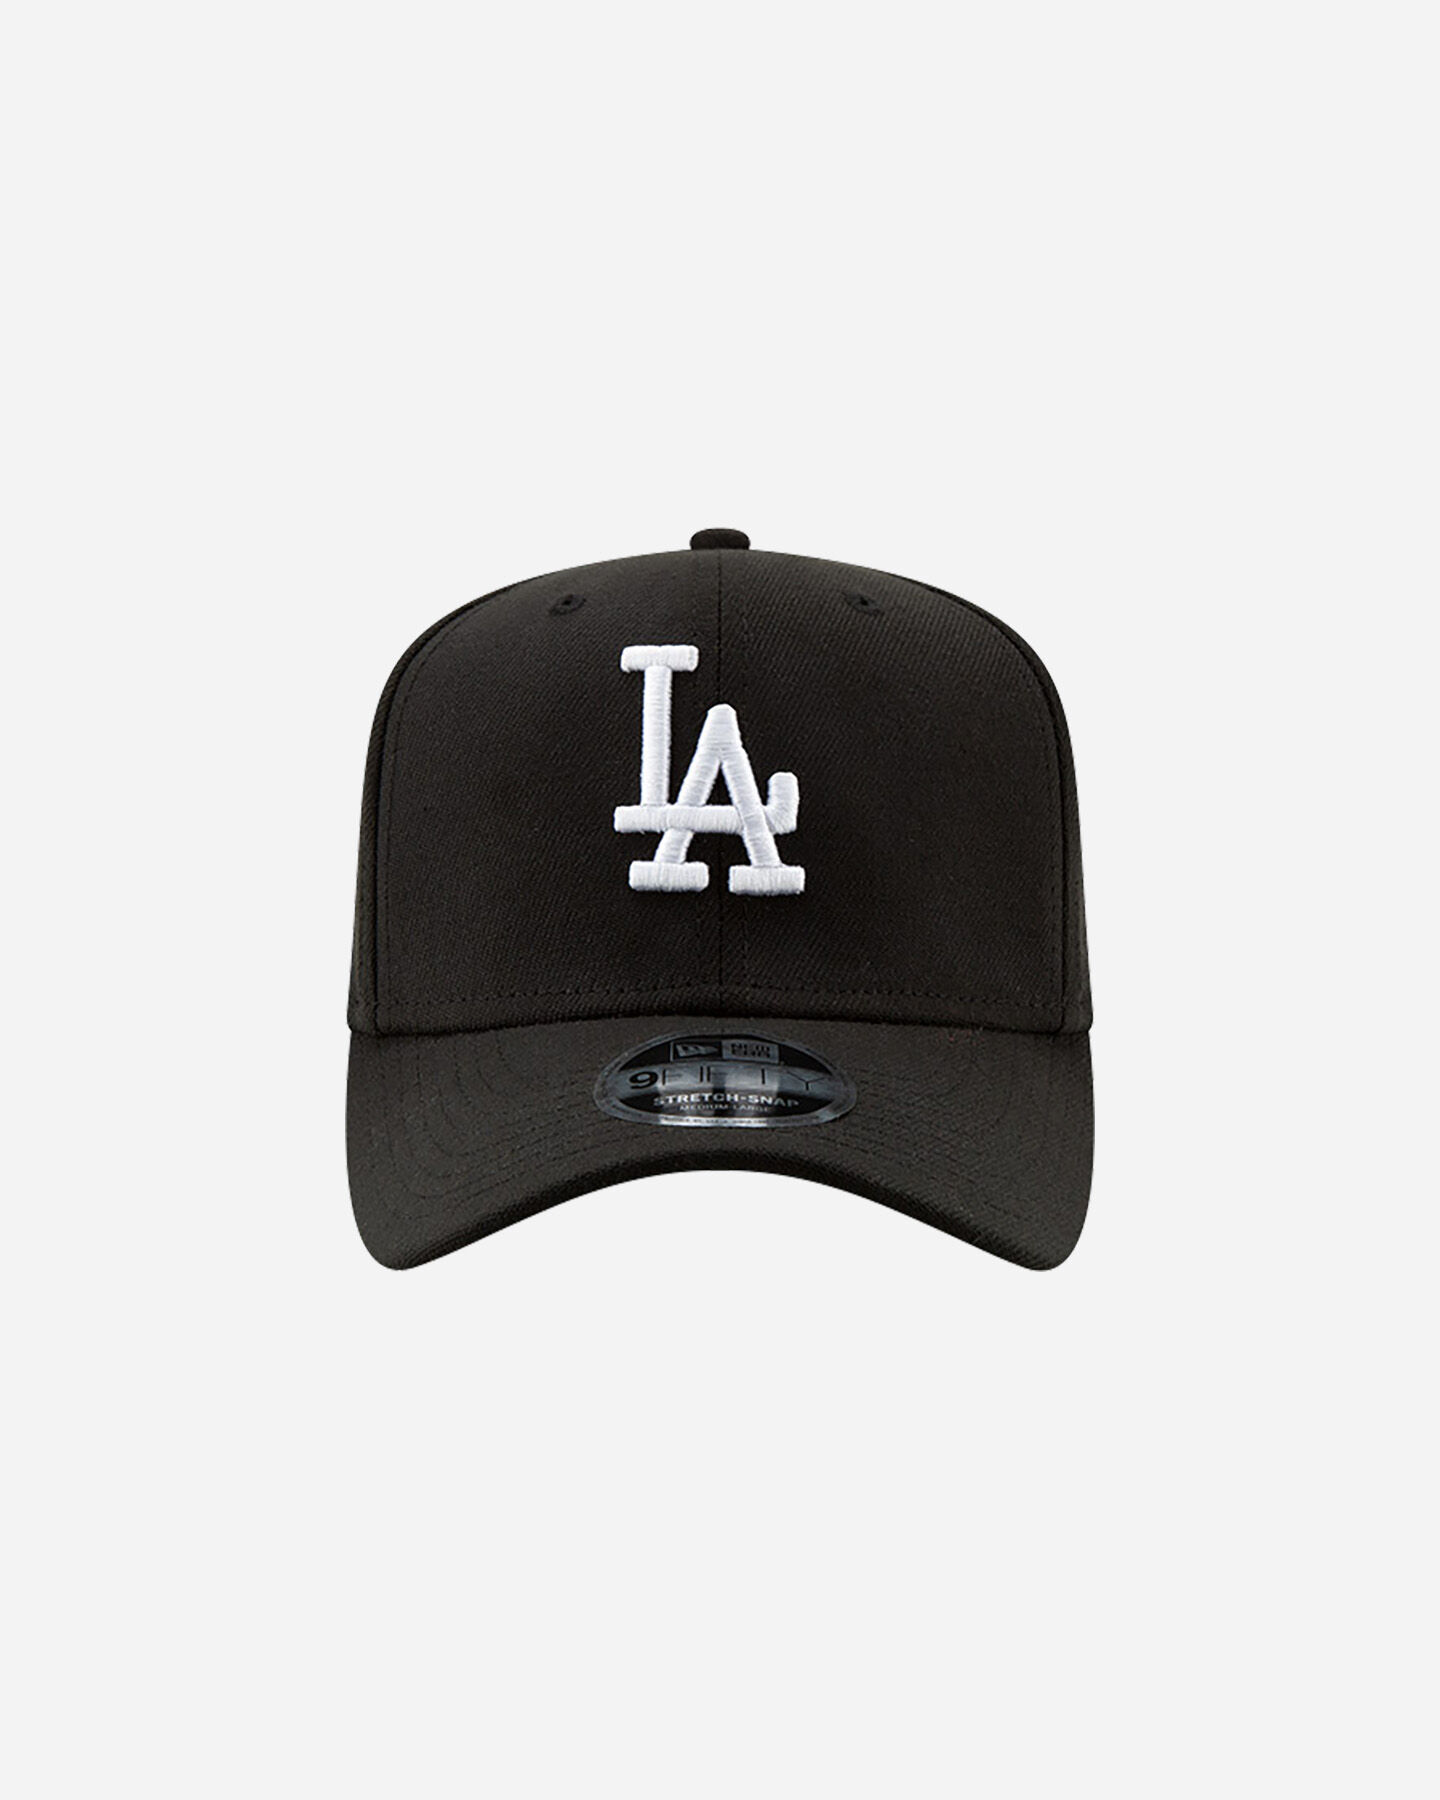  Cappellino NEW ERA 9FIFTY MLB STRETCHSNAP LOS ANGELES DODGERS  S5100641|001|SM scatto 1